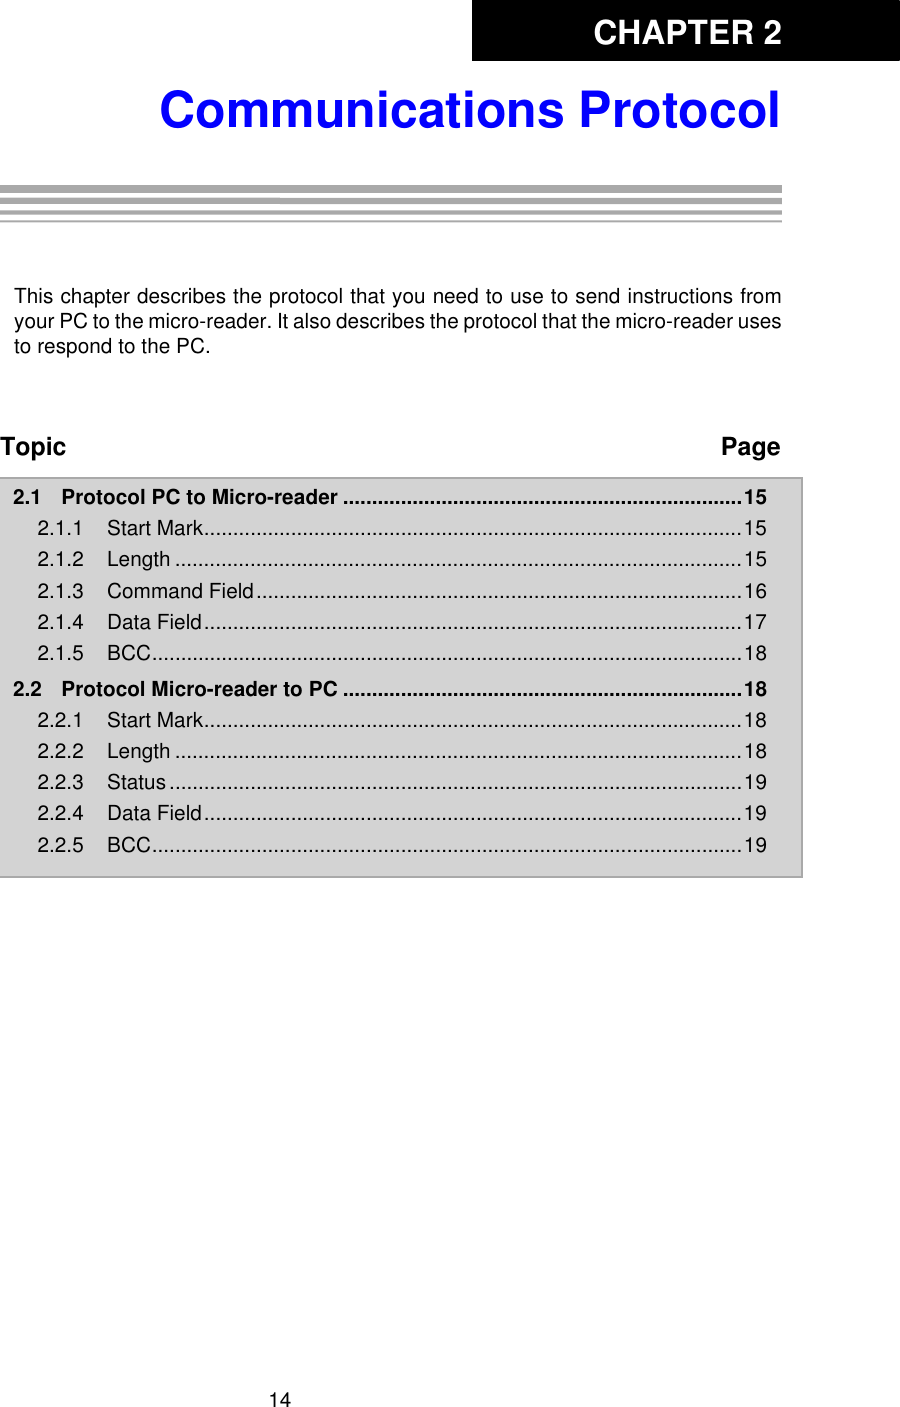 CHAPTER 214Communications ProtocolChapter 2: Communications ProtocolThis chapter describes the protocol that you need to use to send instructions fromyour PC to the micro-reader. It also describes the protocol that the micro-reader usesto respond to the PC. Topic Page2.1 Protocol PC to Micro-reader .....................................................................152.1.1 Start Mark.............................................................................................152.1.2 Length ..................................................................................................152.1.3 Command Field....................................................................................162.1.4 Data Field.............................................................................................172.1.5 BCC......................................................................................................182.2 Protocol Micro-reader to PC .....................................................................182.2.1 Start Mark.............................................................................................182.2.2 Length ..................................................................................................182.2.3 Status...................................................................................................192.2.4 Data Field.............................................................................................192.2.5 BCC......................................................................................................19